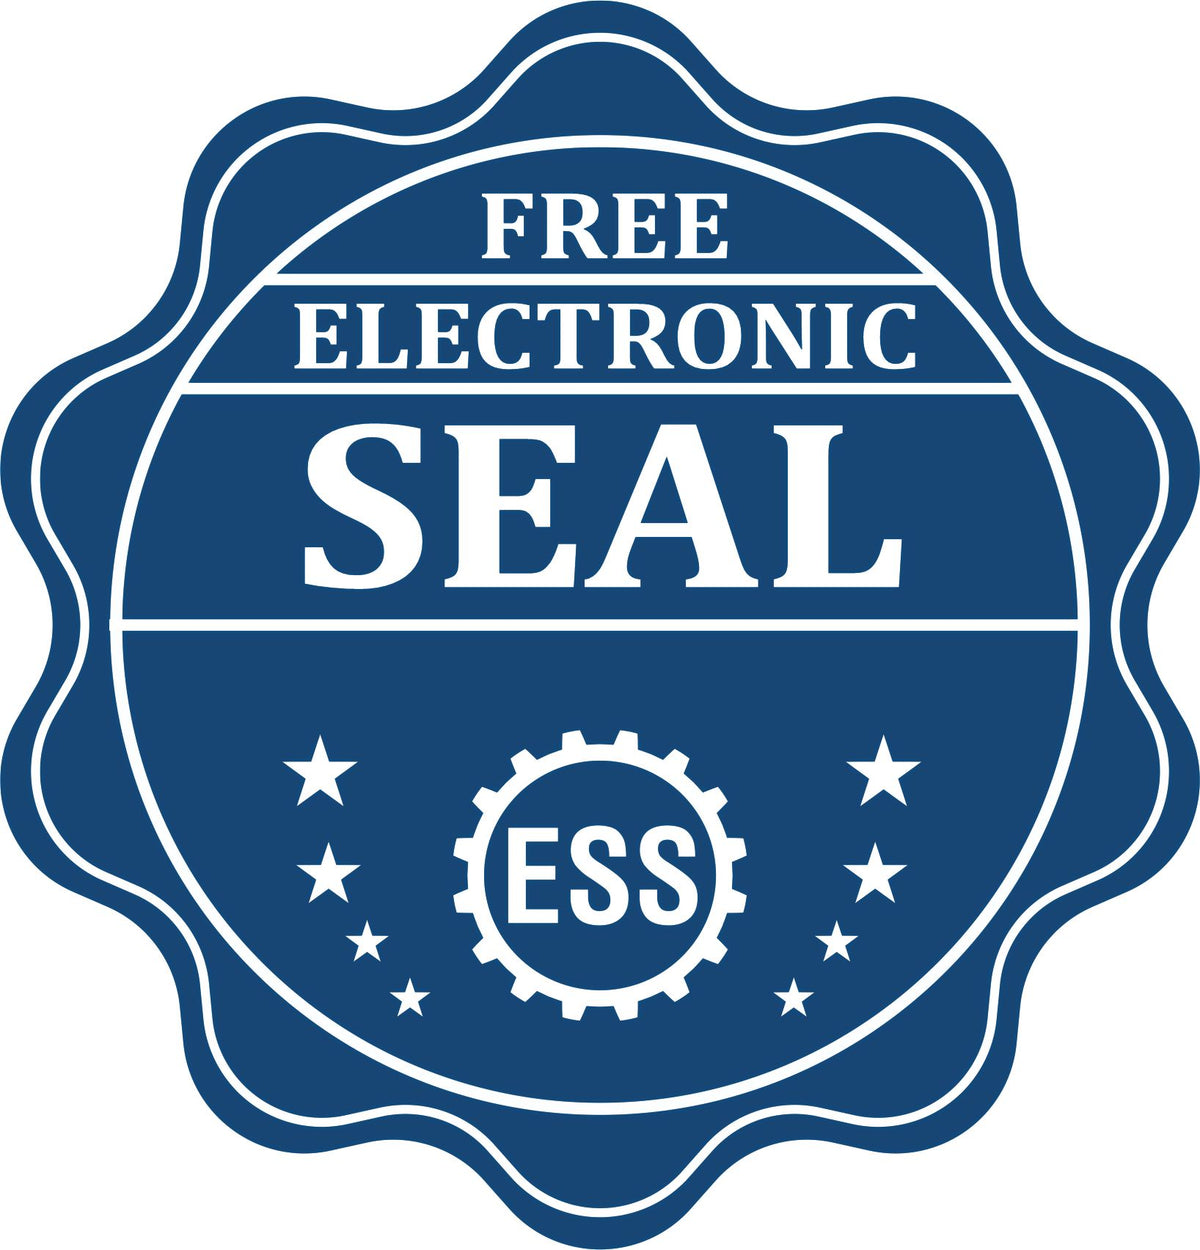 A badge showing a free electronic seal for the MaxLight Premium Pre-Inked Massachusetts State Seal Notarial Stamp with stars and the ESS gear on the emblem.